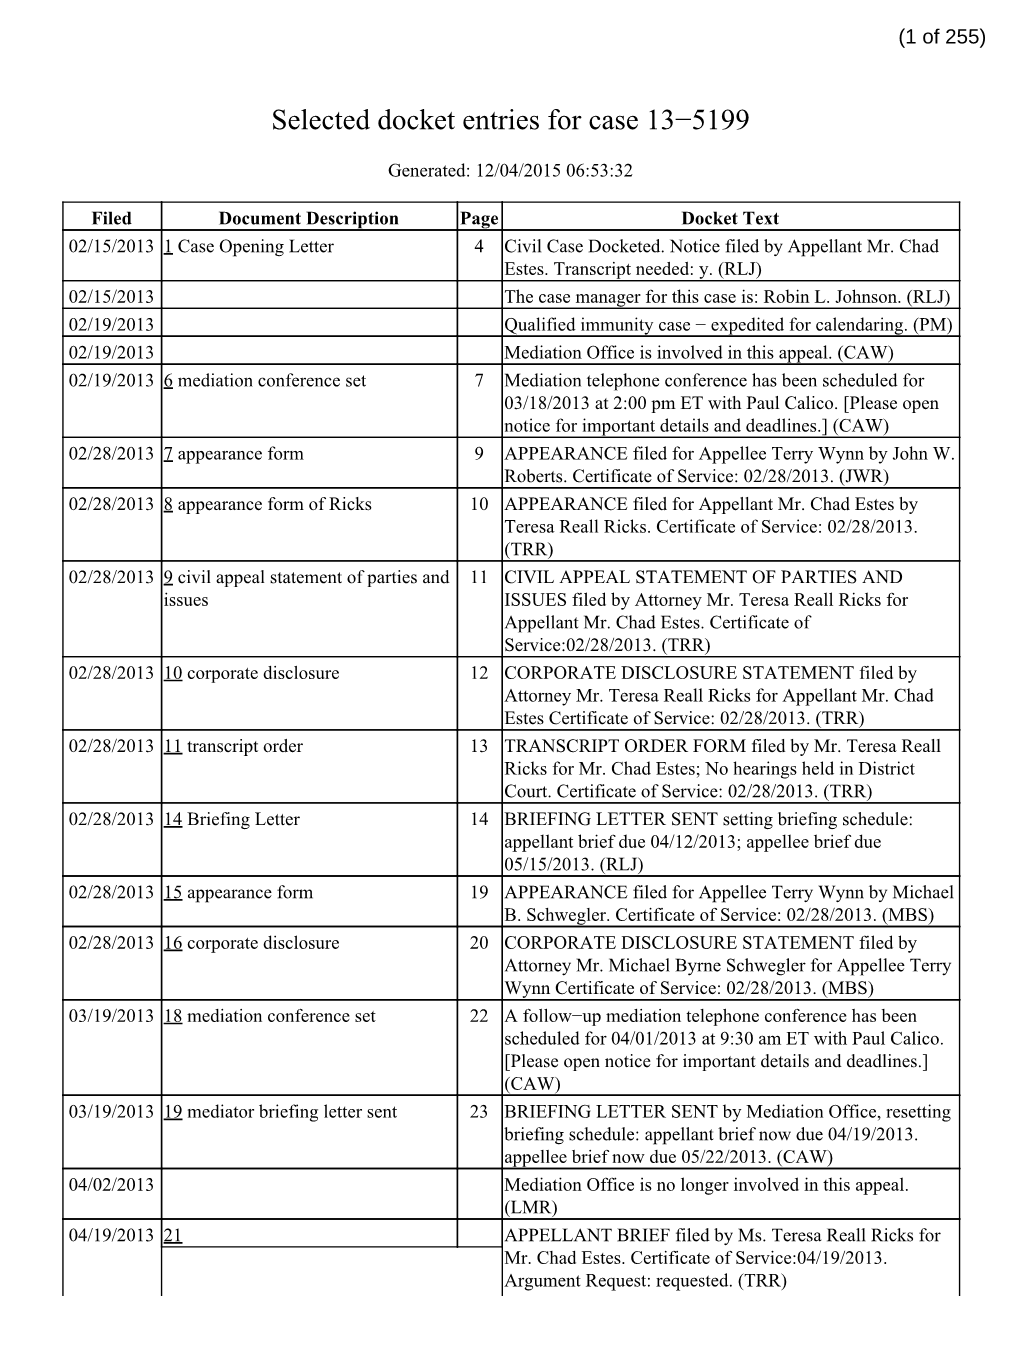 Selected Docket Entries for Case 13−5199